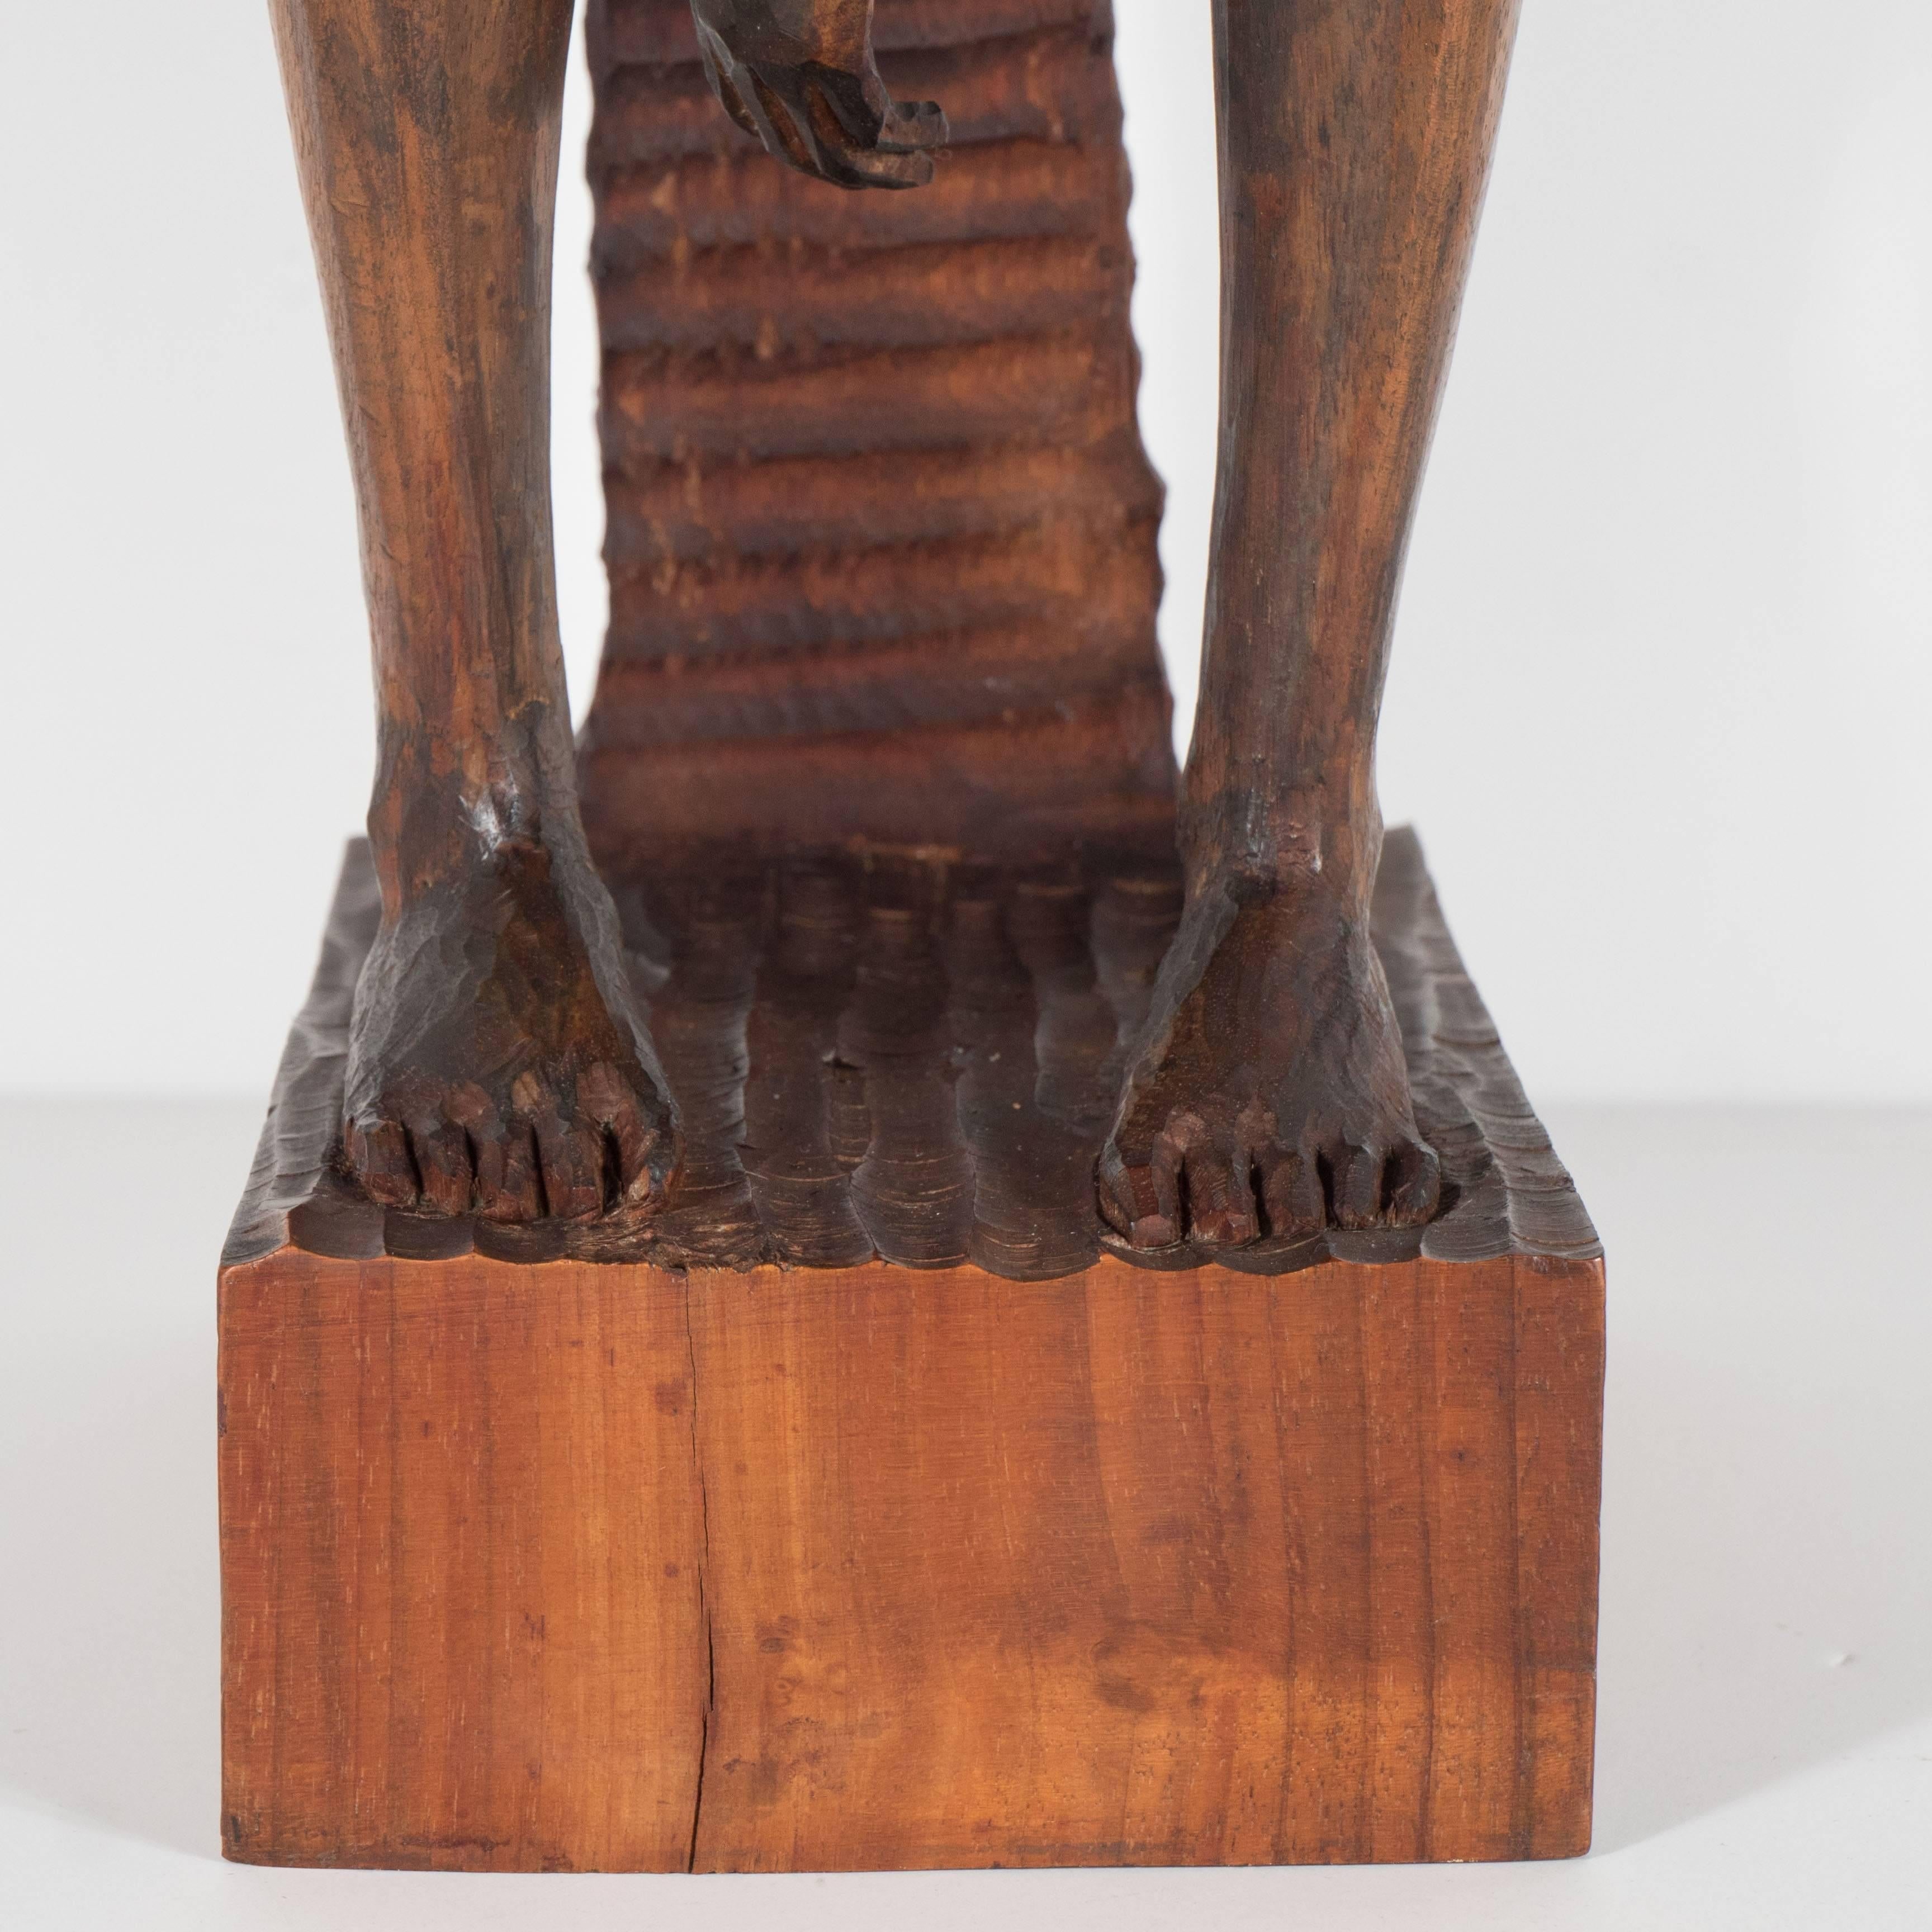 Hand-Carved Wood Contemplative Seated Nude Sculpture by Aldo Calo For Sale 2